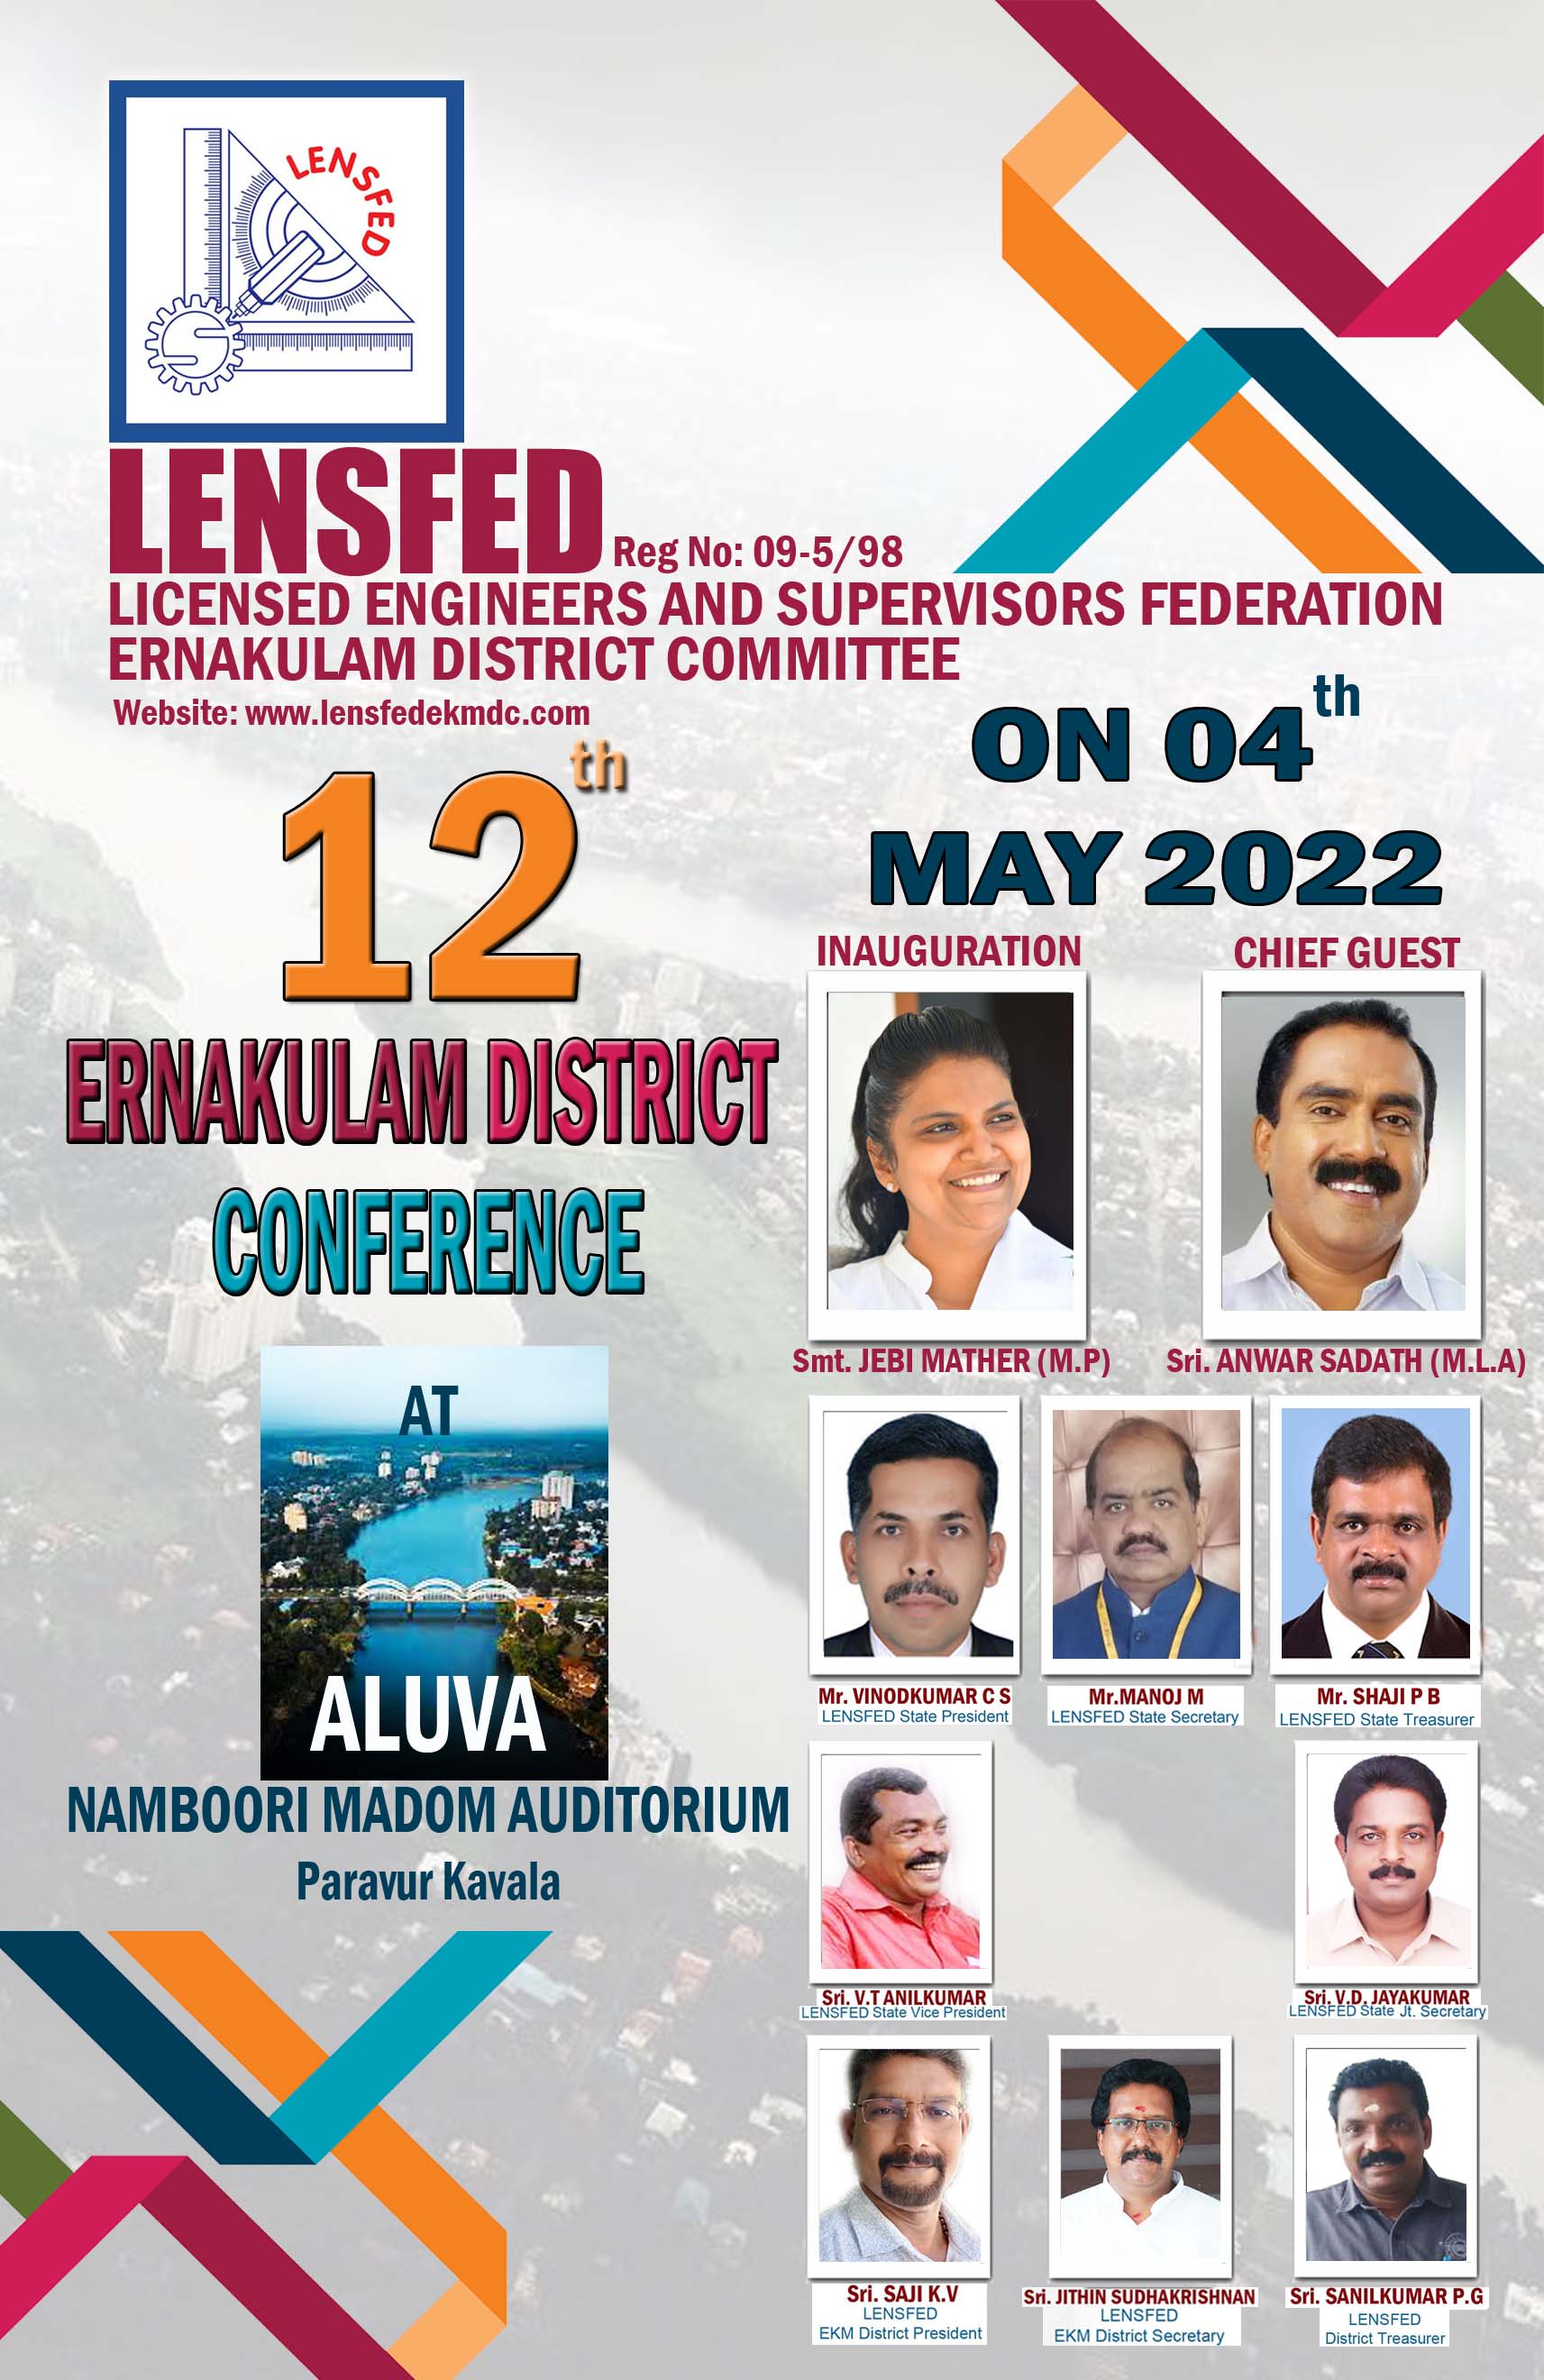 LENSFED 12TH ERNAKULAM DISTRICT CONFERENCE